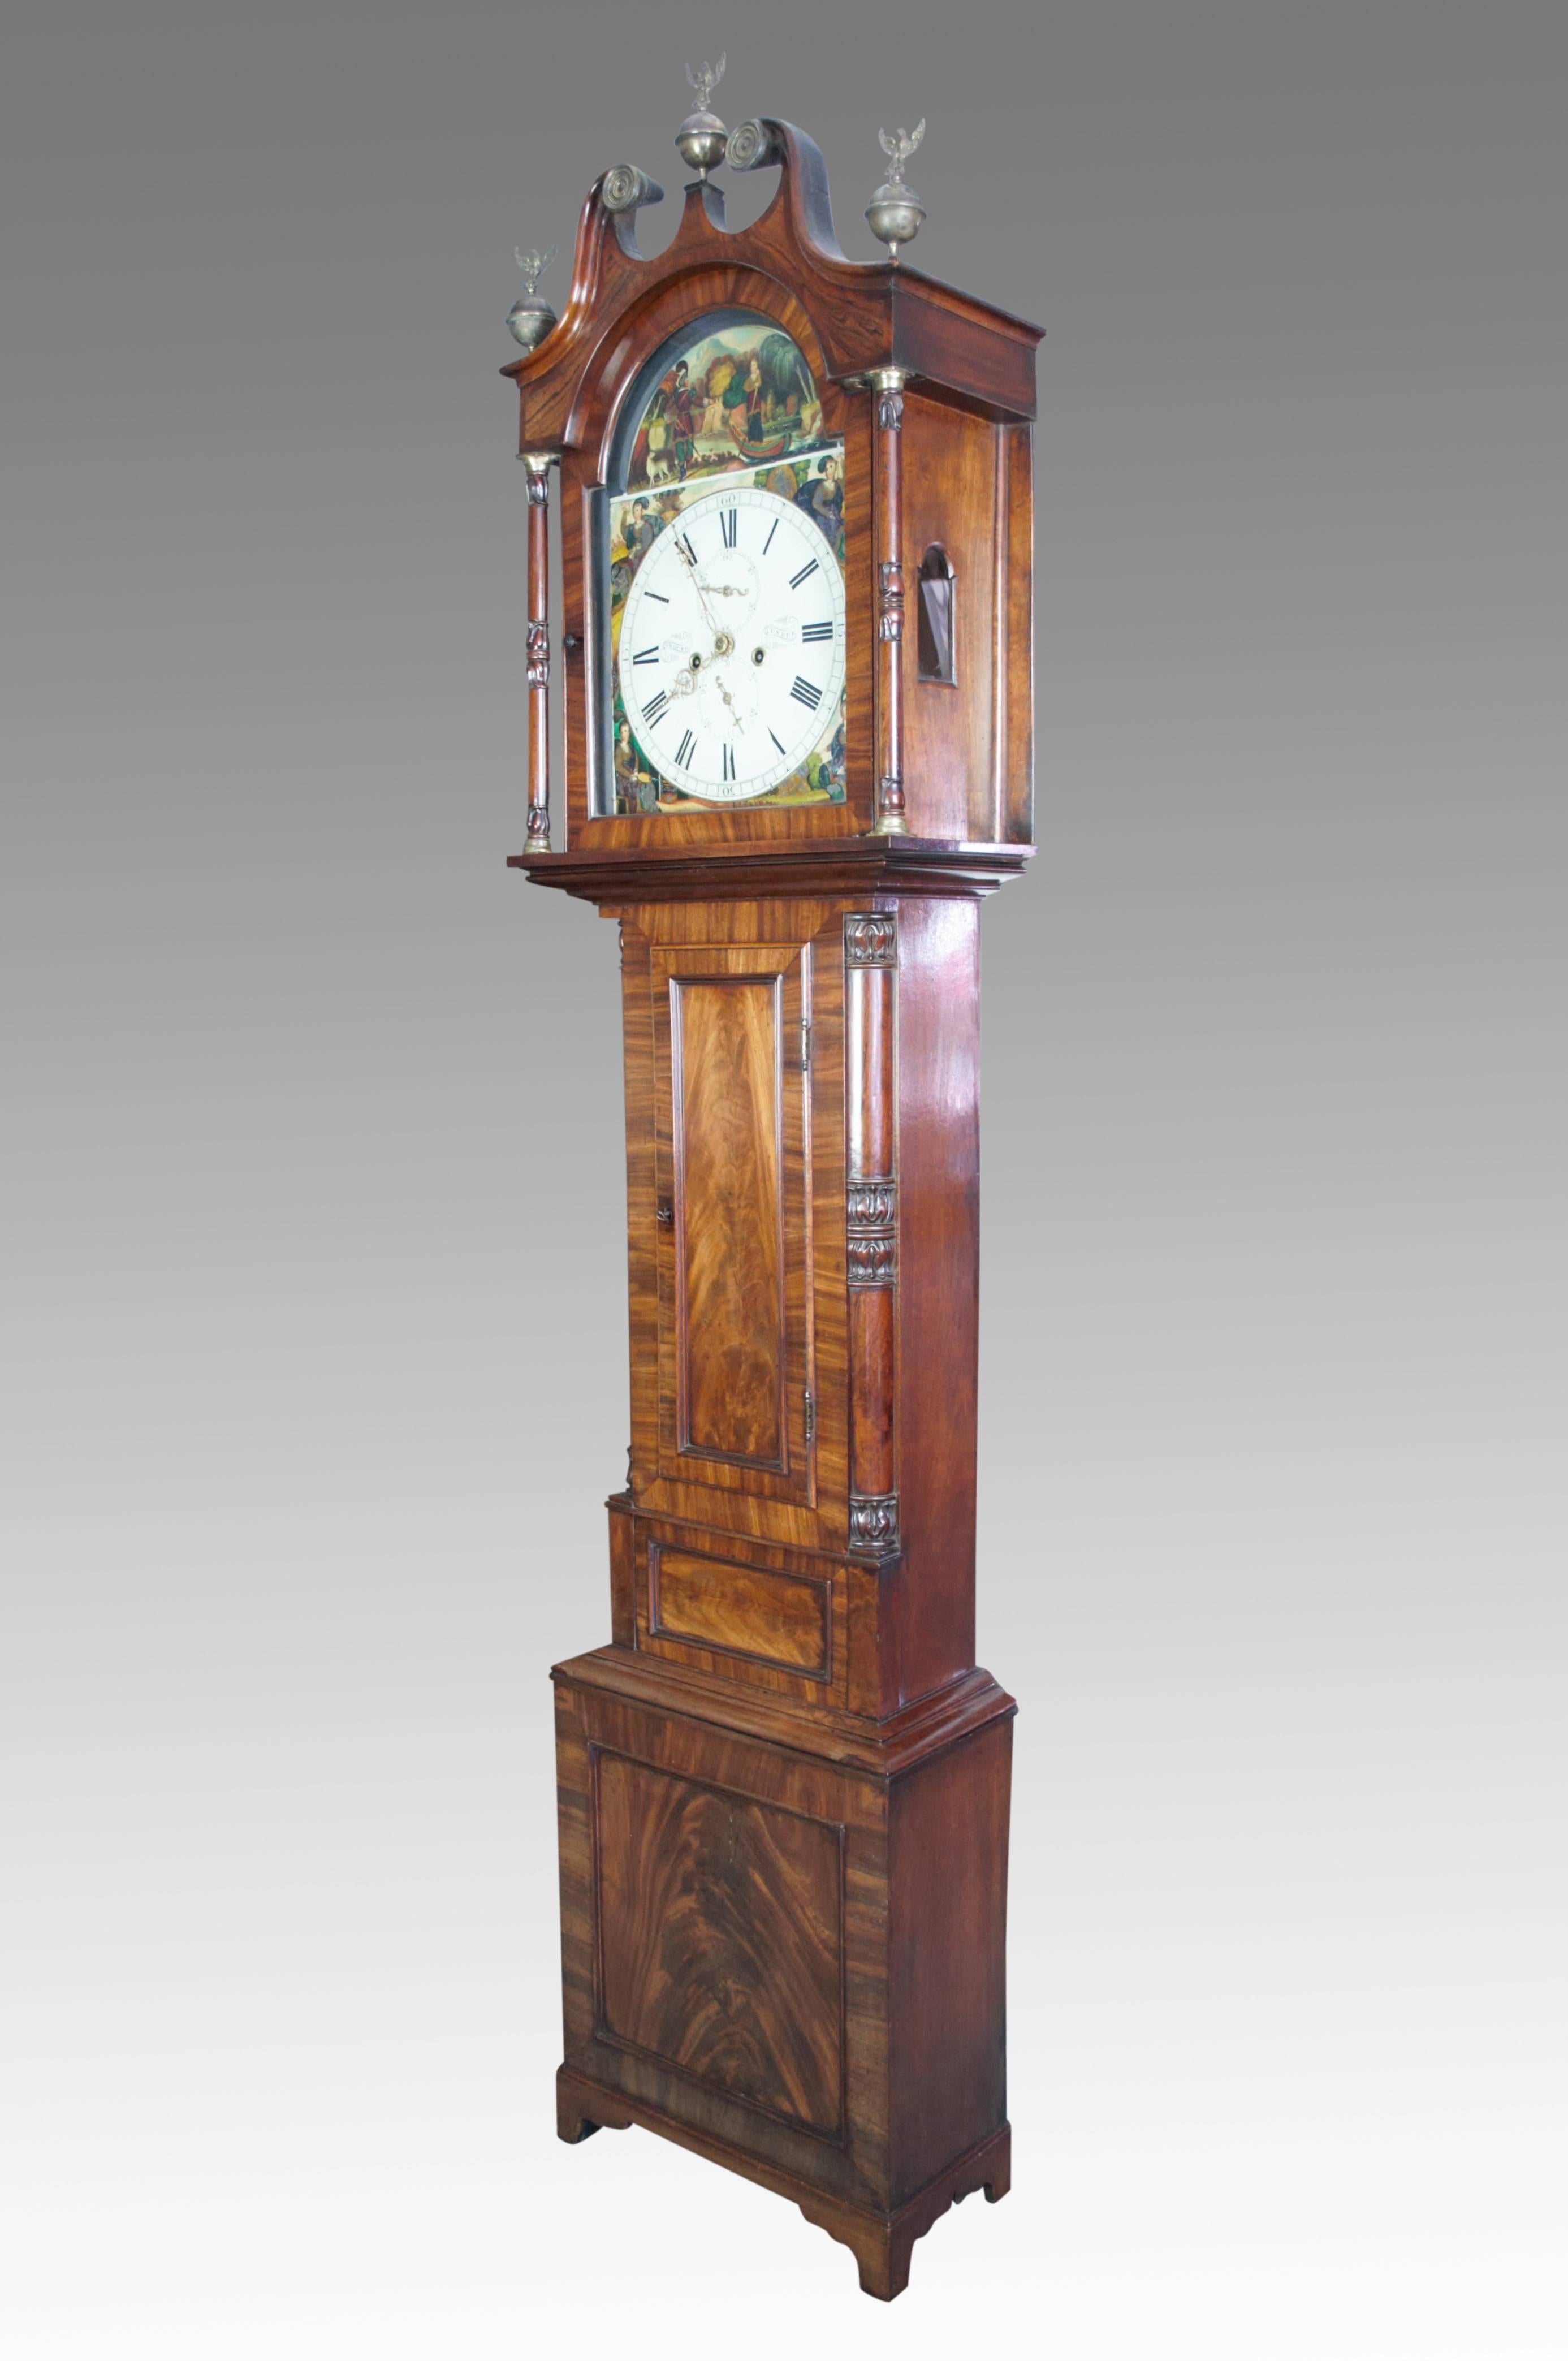 A high quality mahogany Scottish longcase clock by William Young of Dundee, with 8 day movement and hourly strike. The arched painted dial with Roman numerals, a seconds dial and date dial. Painted in each corner with scenes of the Four Seasons and